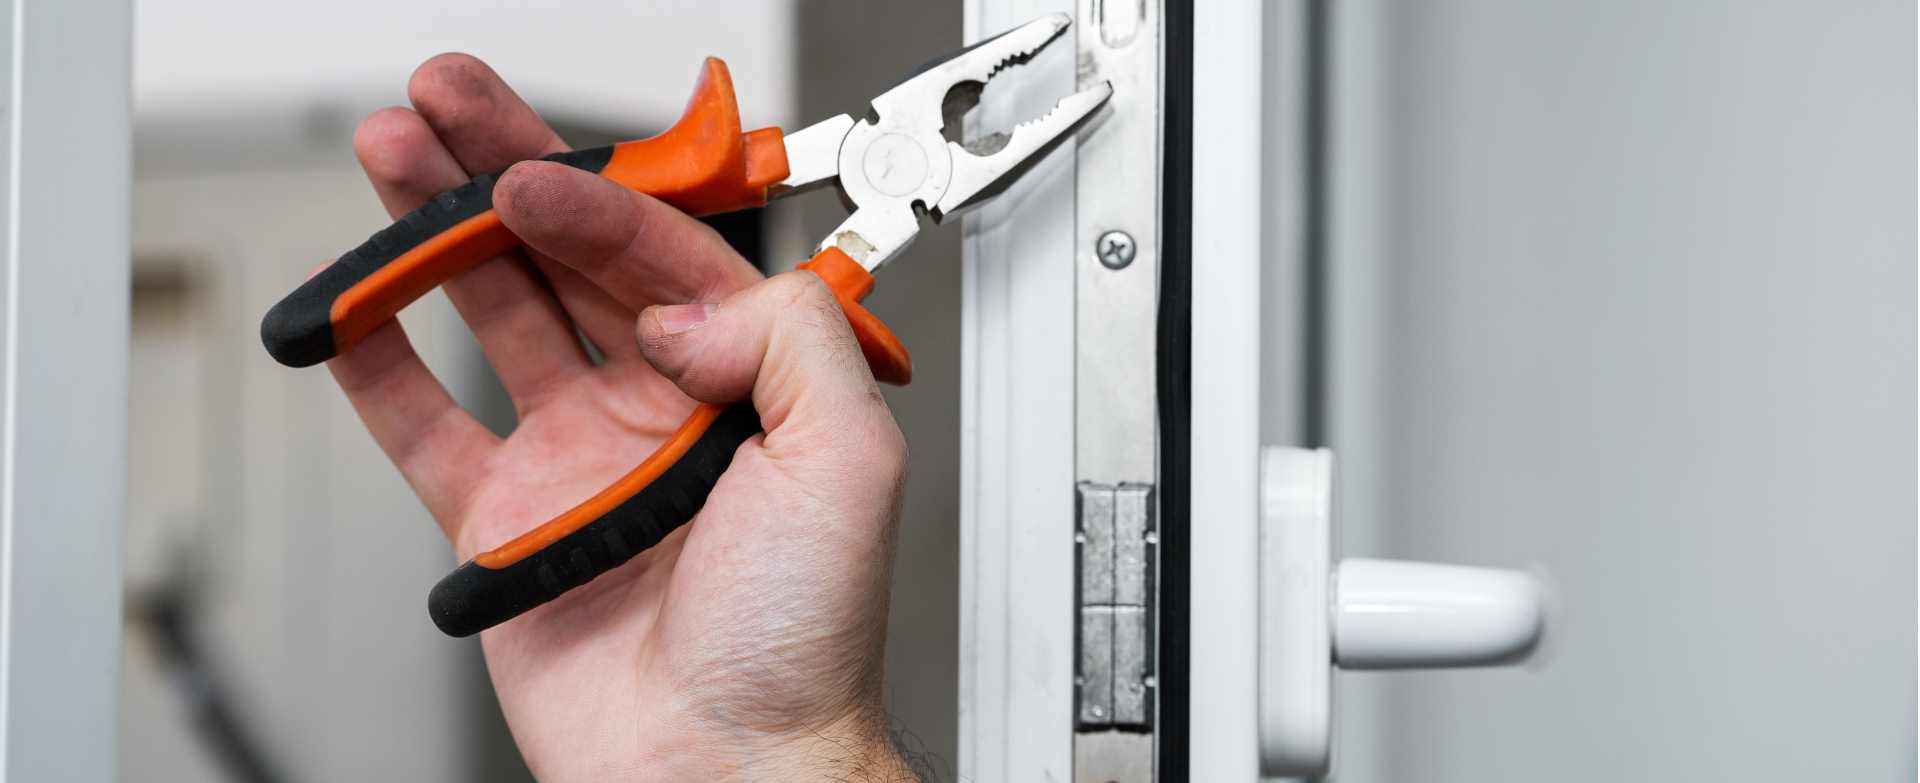 Professional UPVC door repair near me by CLS approved locksmiths